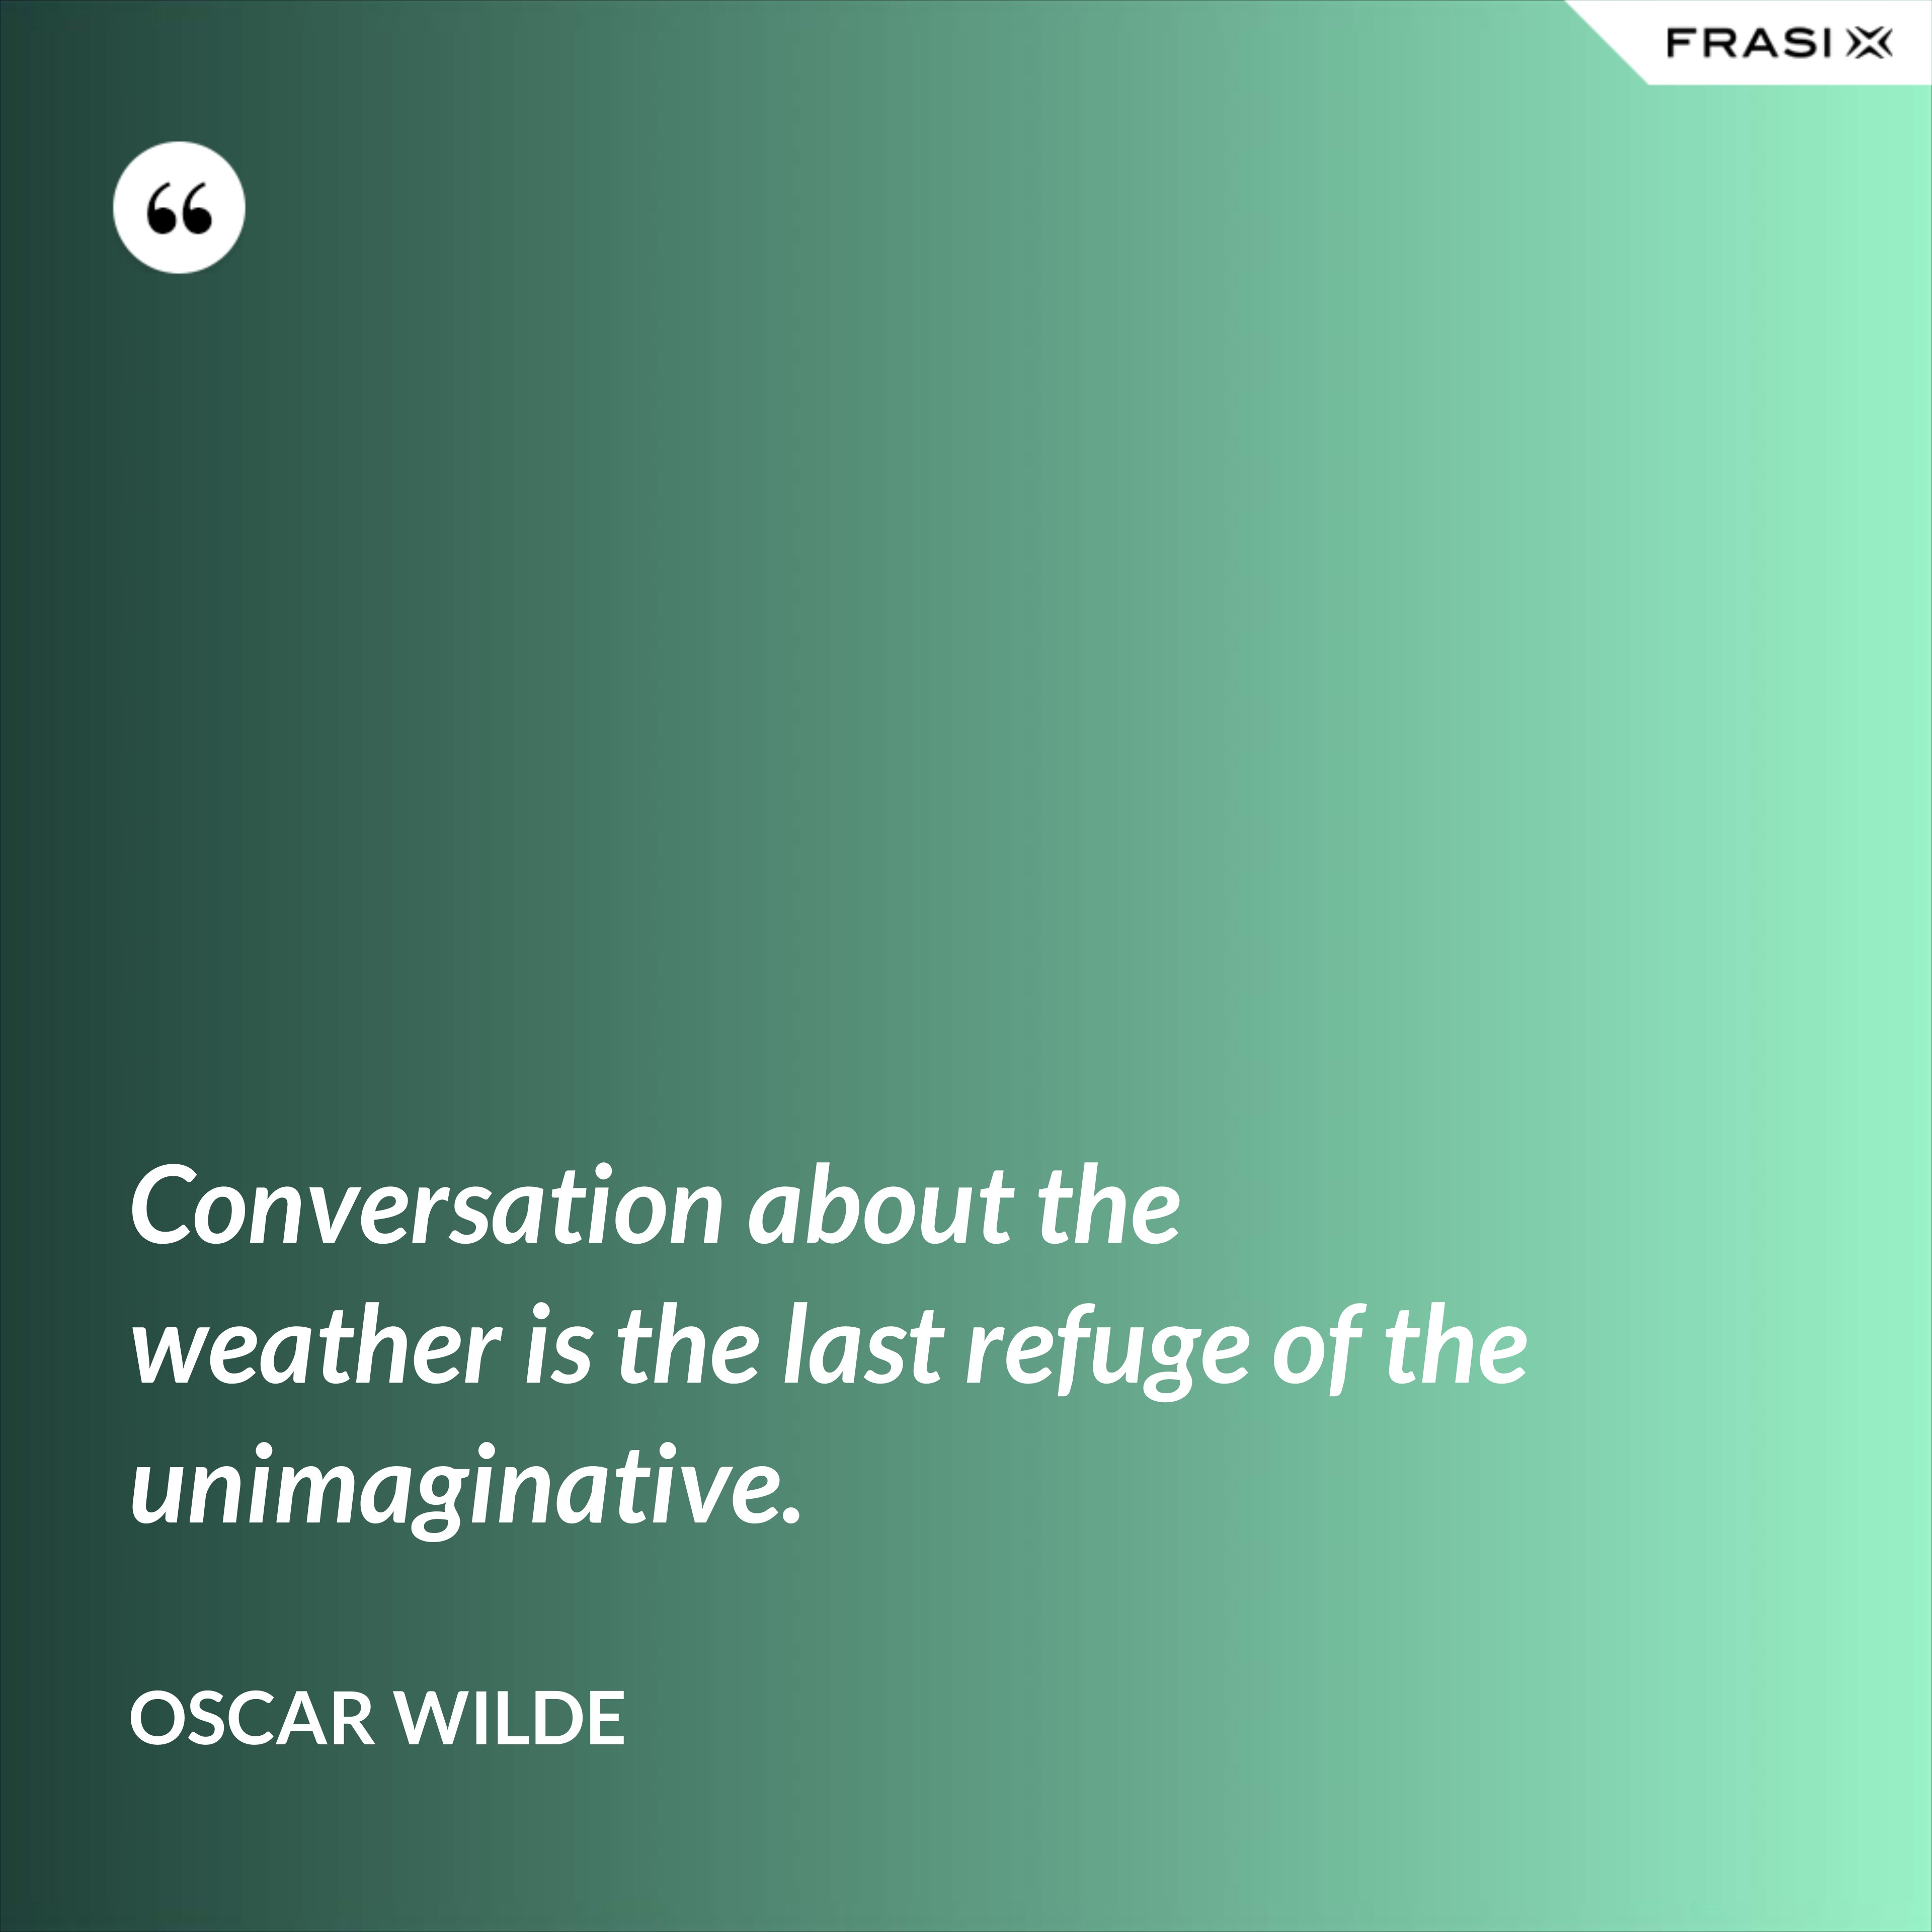 Conversation about the weather is the last refuge of the unimaginative. - Oscar Wilde